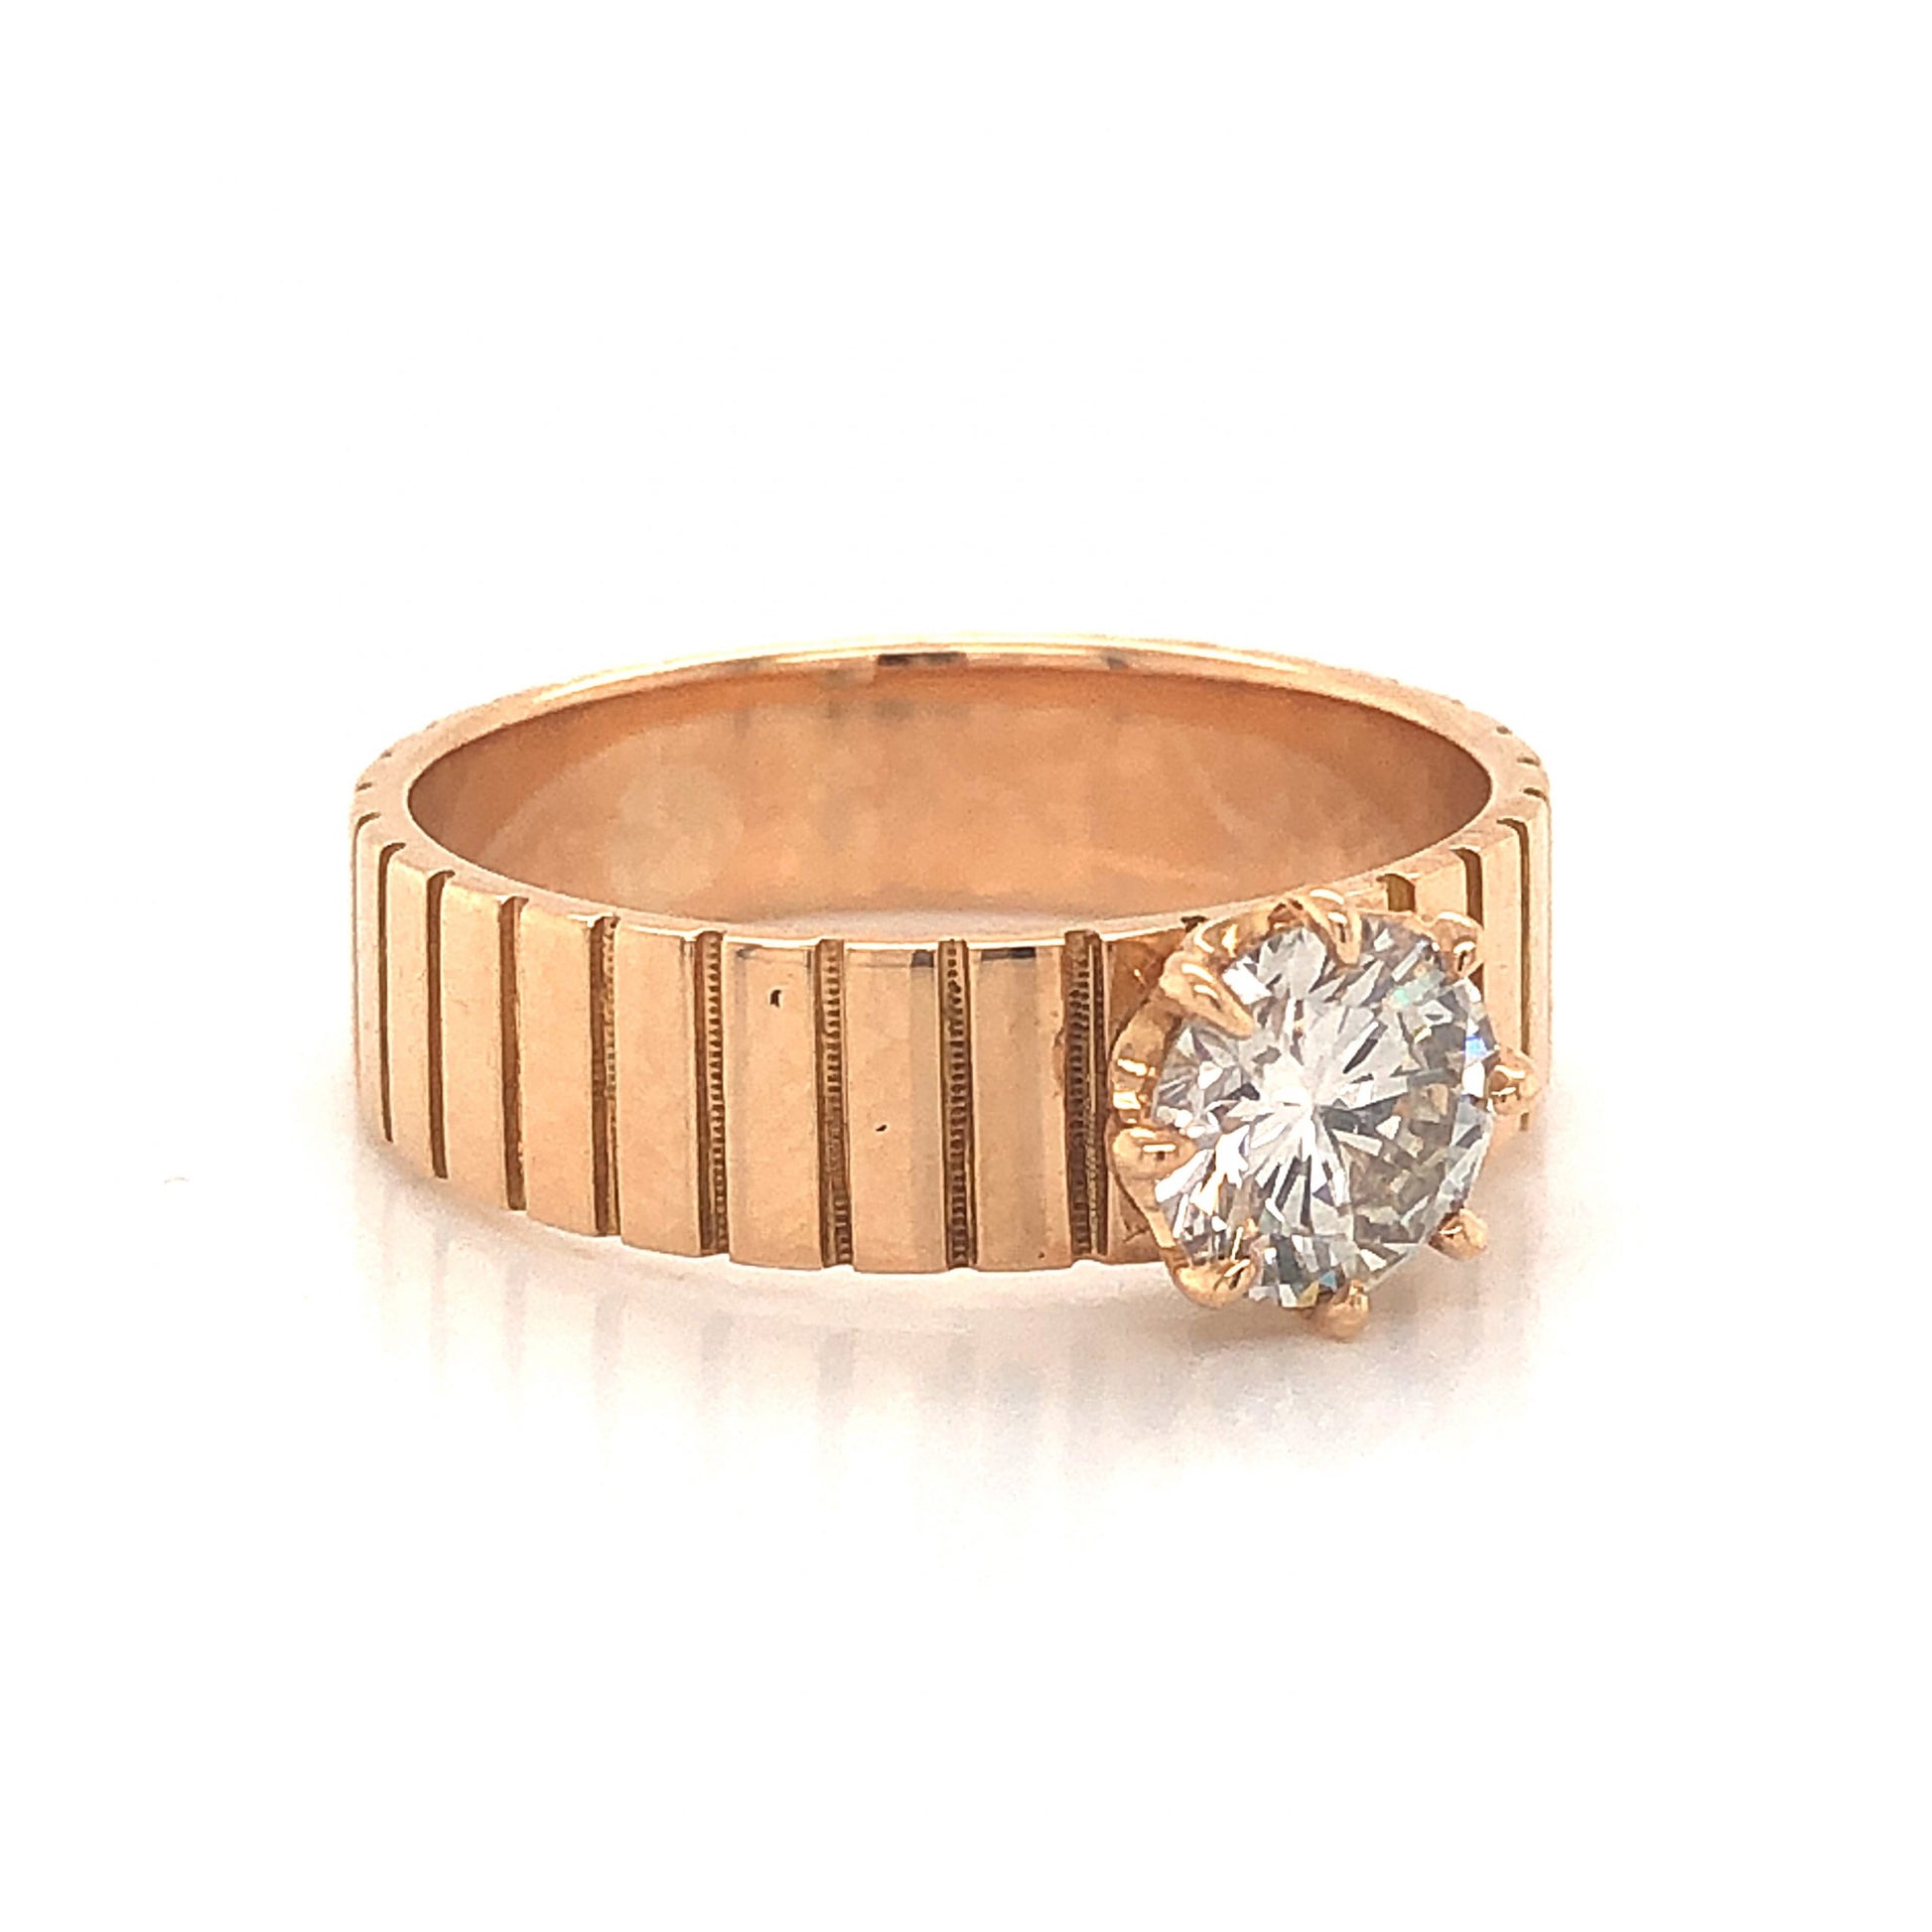 Mid-Century .70 Diamond Engagement Ring in 14k Yellow GoldComposition: 14 Karat Yellow Gold Ring Size: 6 Total Diamond Weight: .70ct Total Gram Weight: 4.3 g